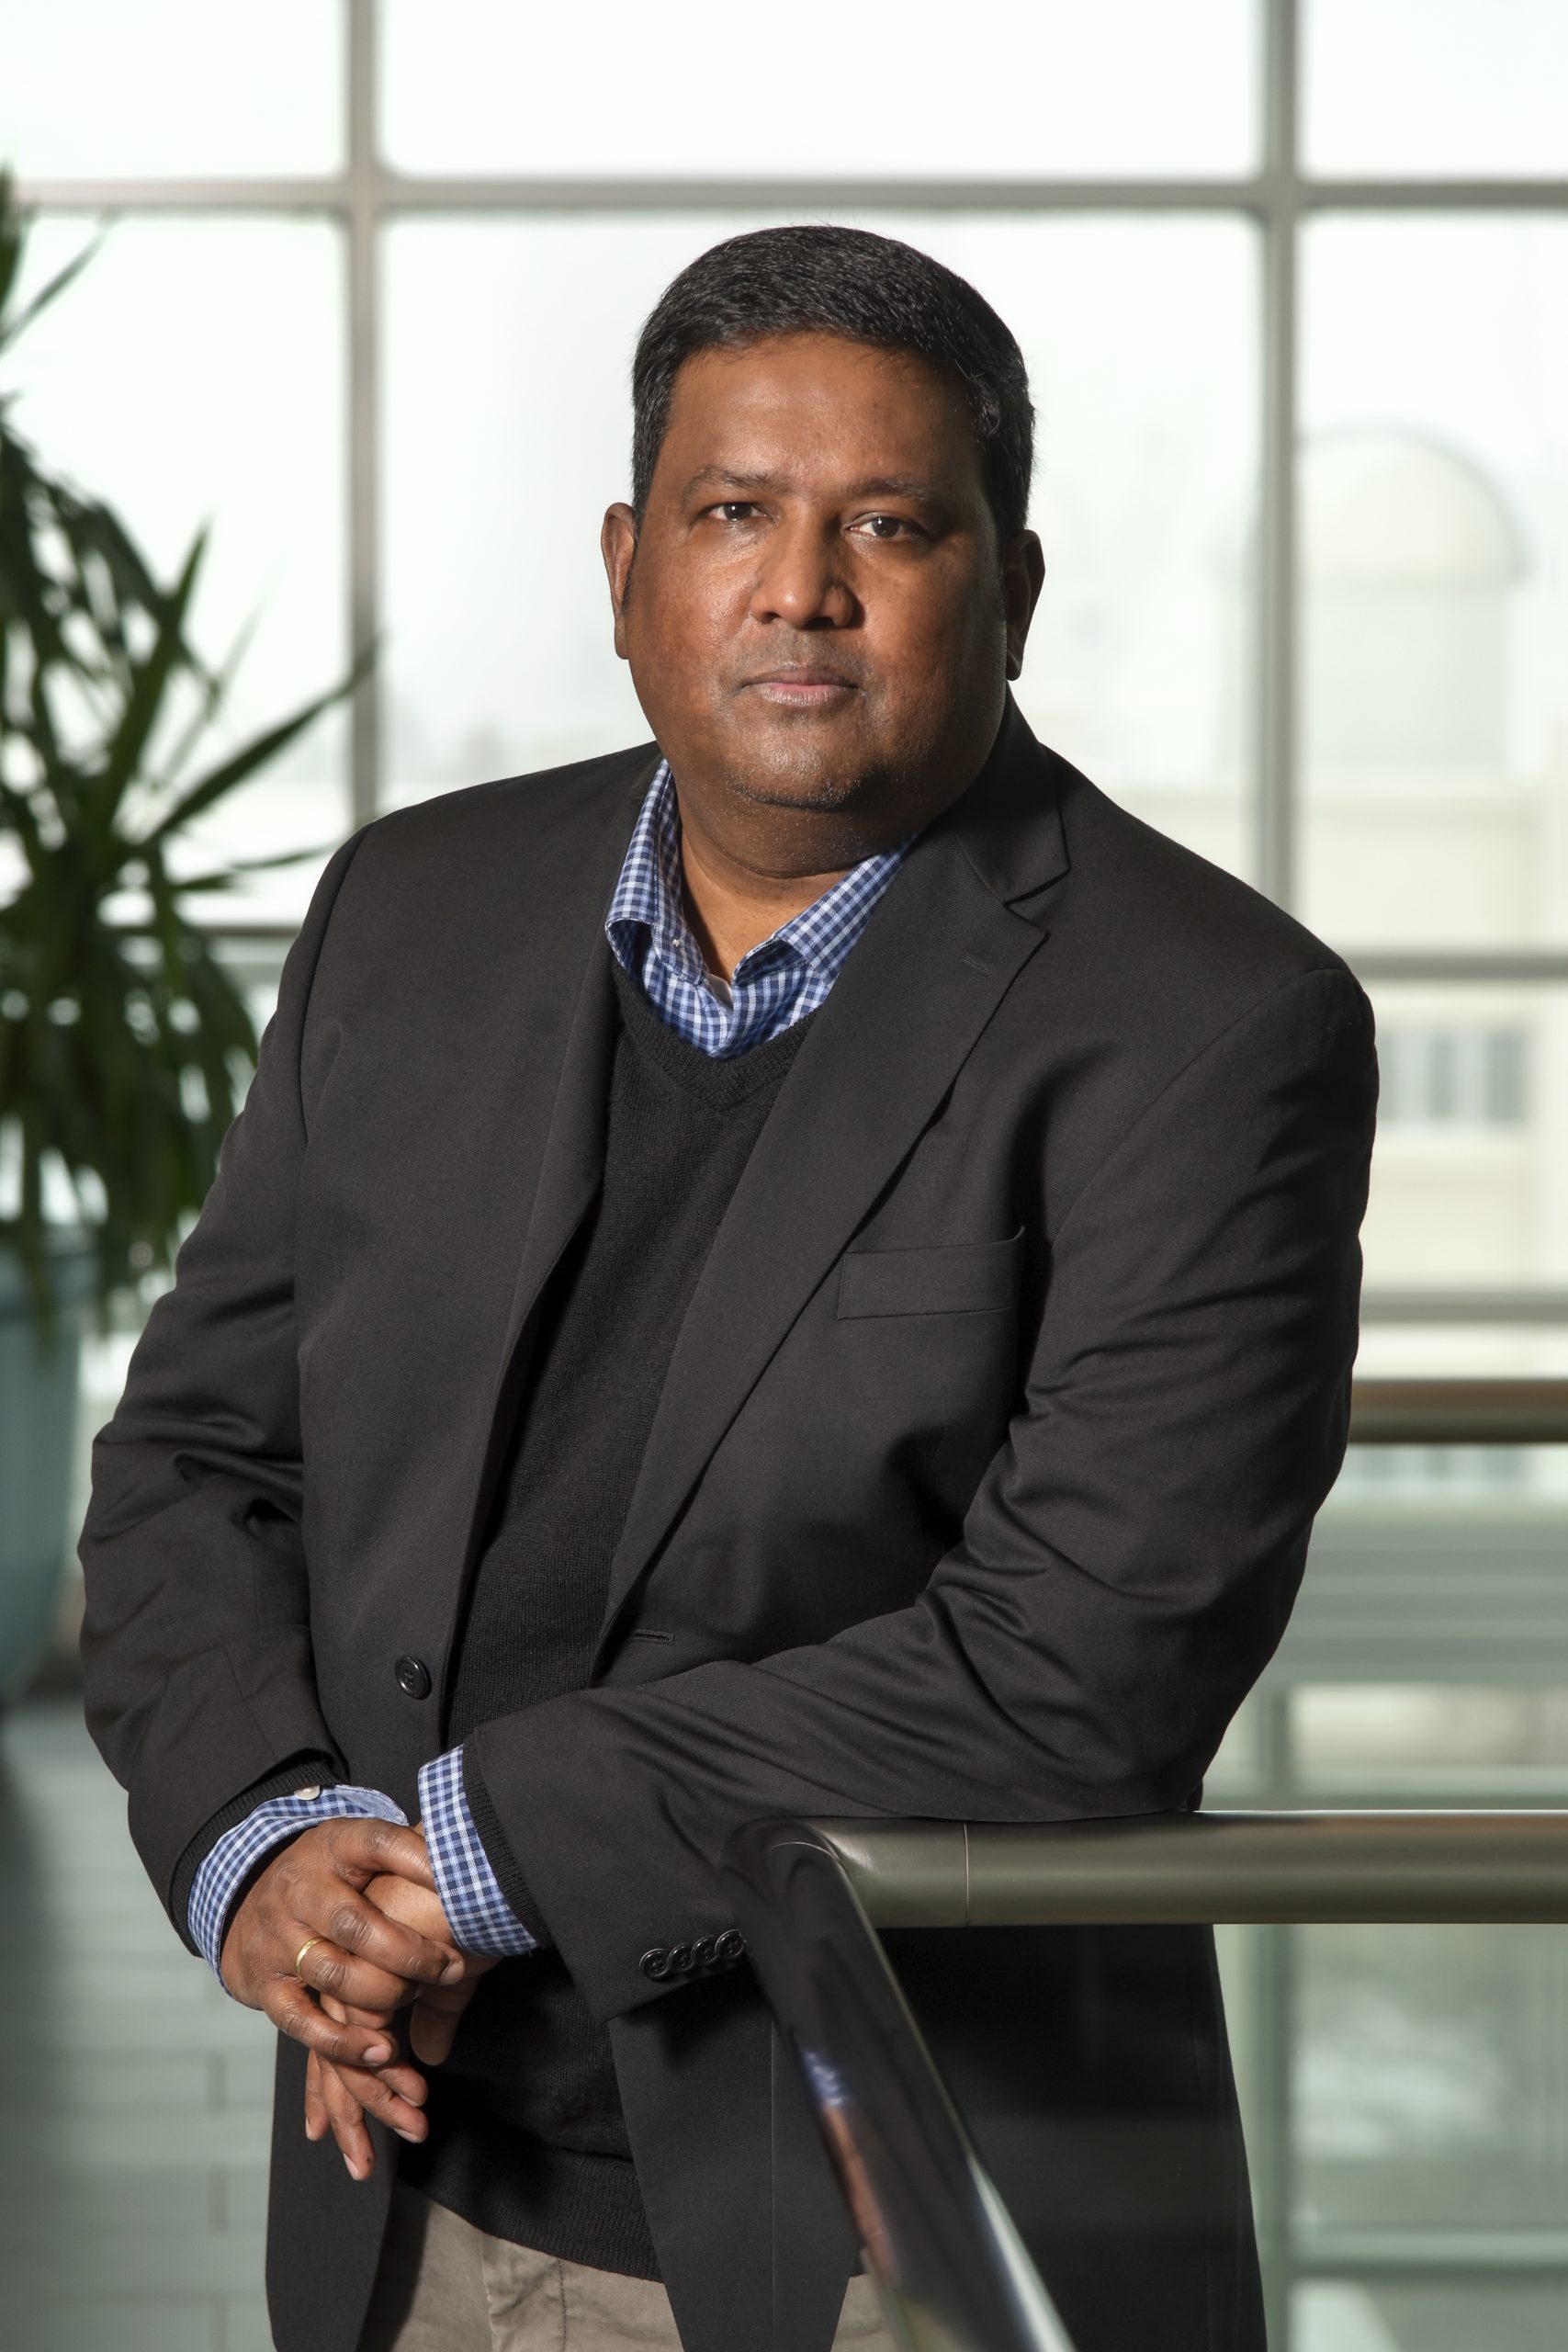 Dr. Mohan Babu and his team awarded $2 million USD for autism spectrum disorder research